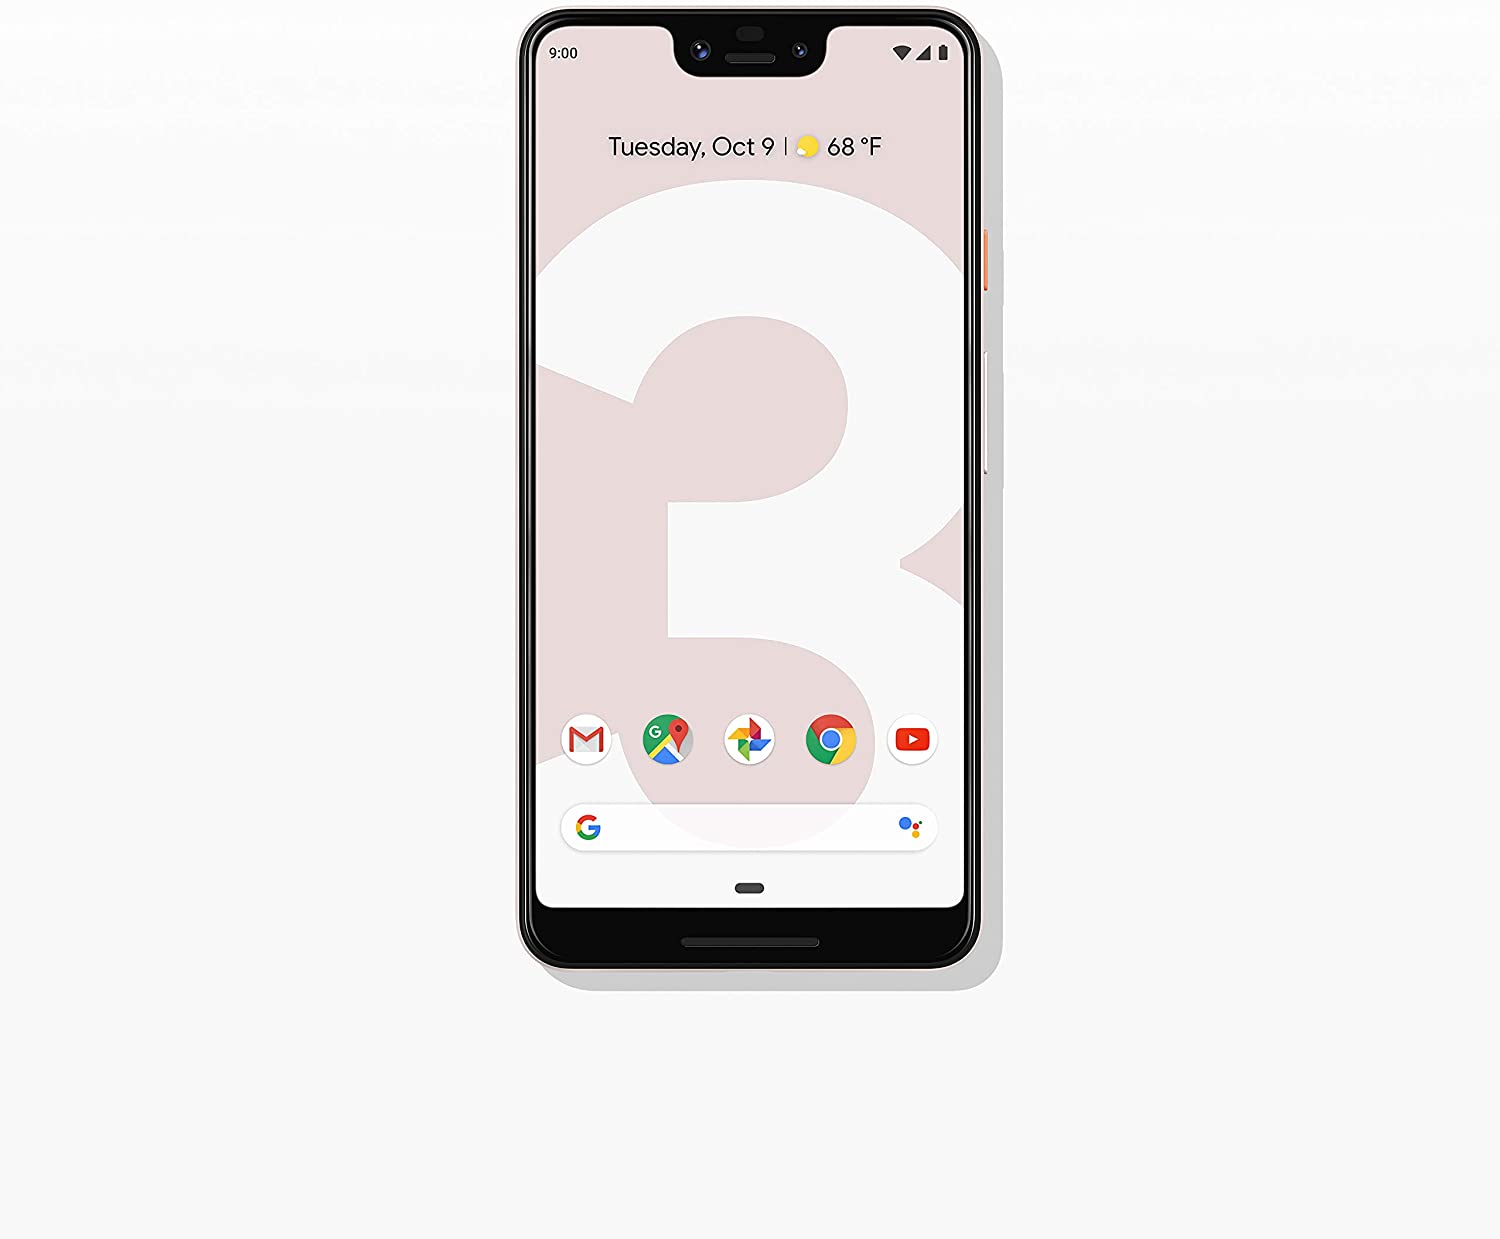 Google Pixel 3 XL 64GB Unlocked Phone Not Pink @Amazon via Woot $215 and More